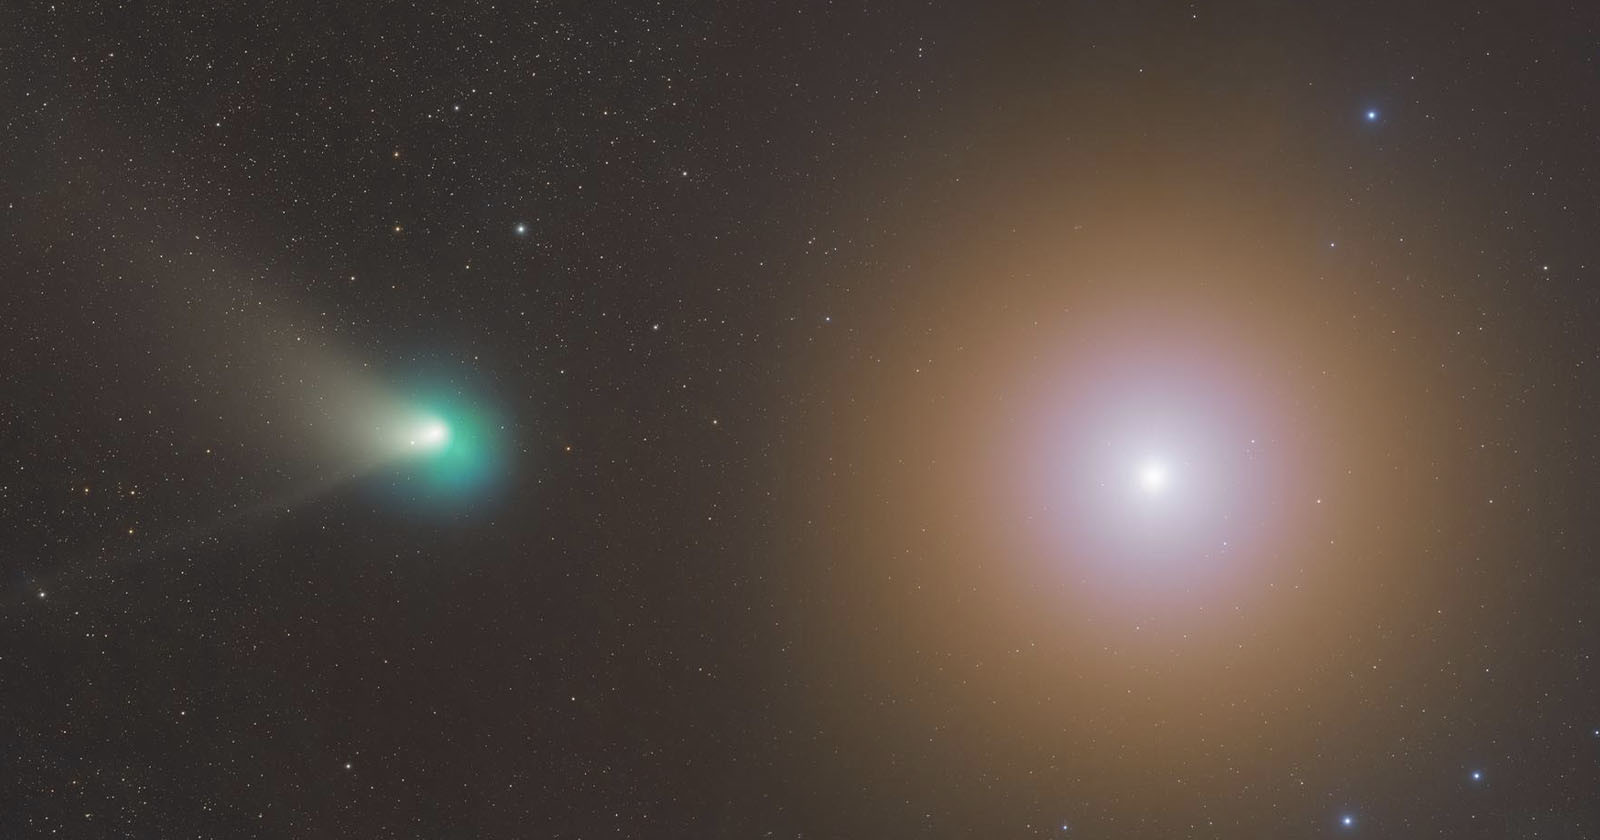 Photographers Dodge Coyotes to Capture Comet and Mars Together